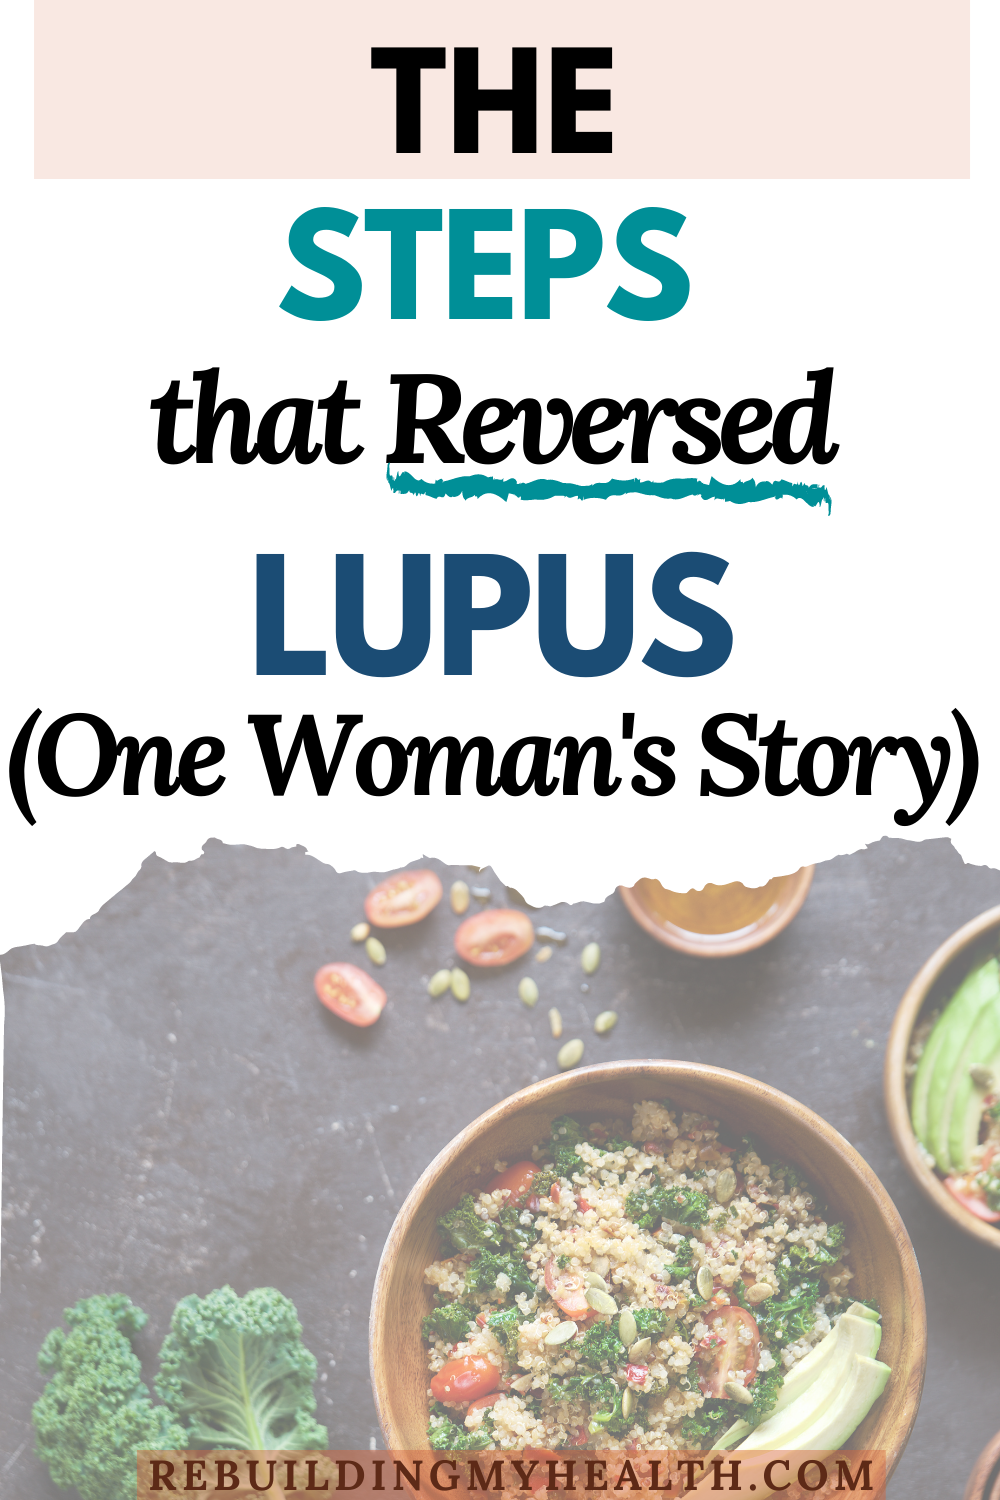 Learn how one woman healed lupus symptoms with diet and lifestyle